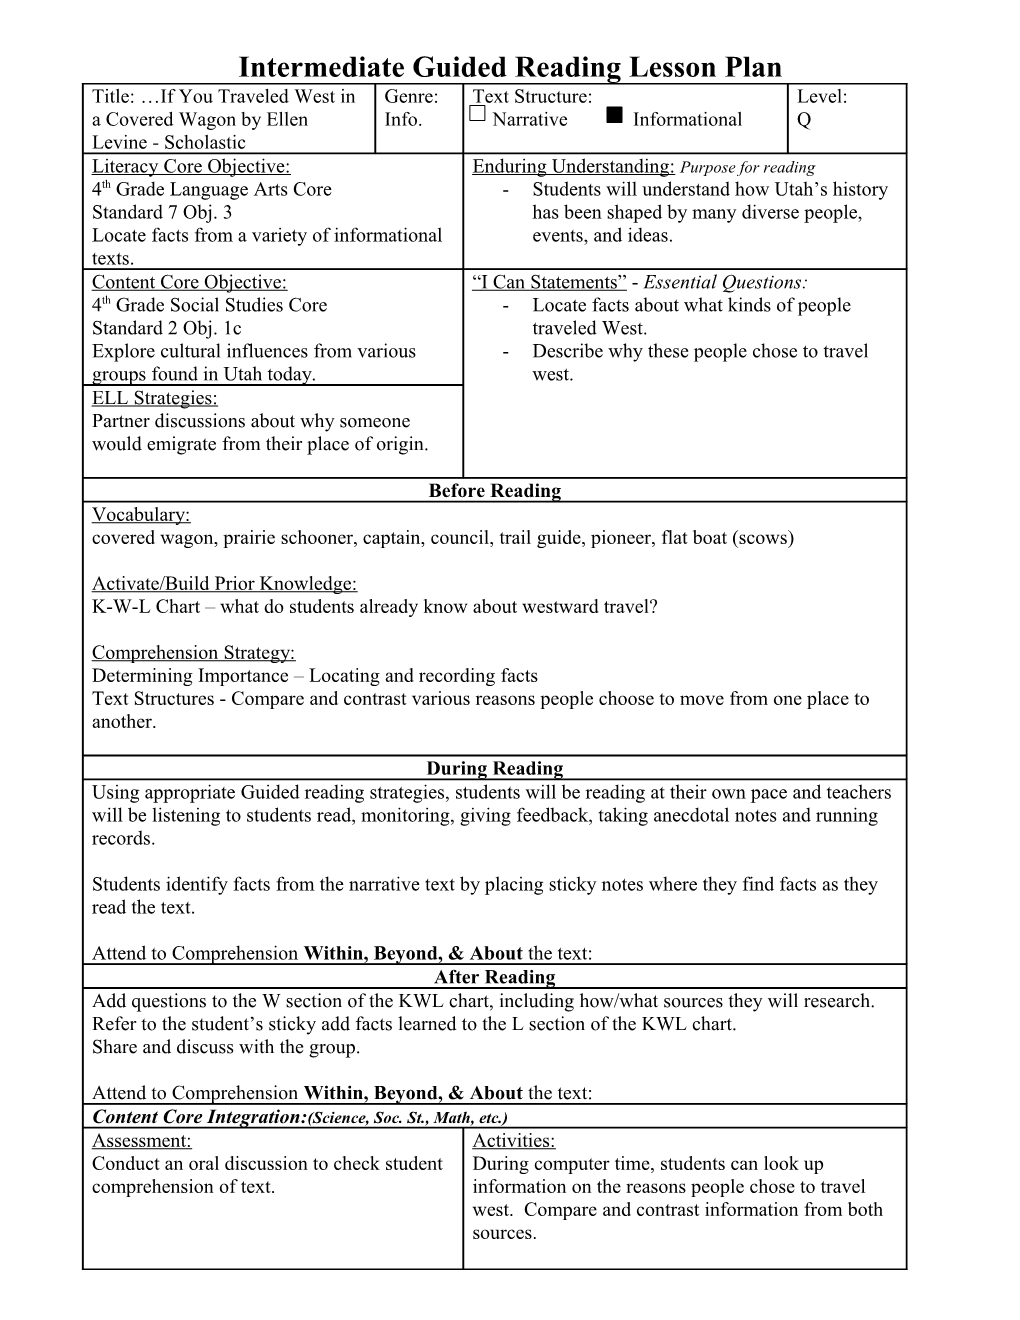 Intermediate Guided Reading Lesson Plan